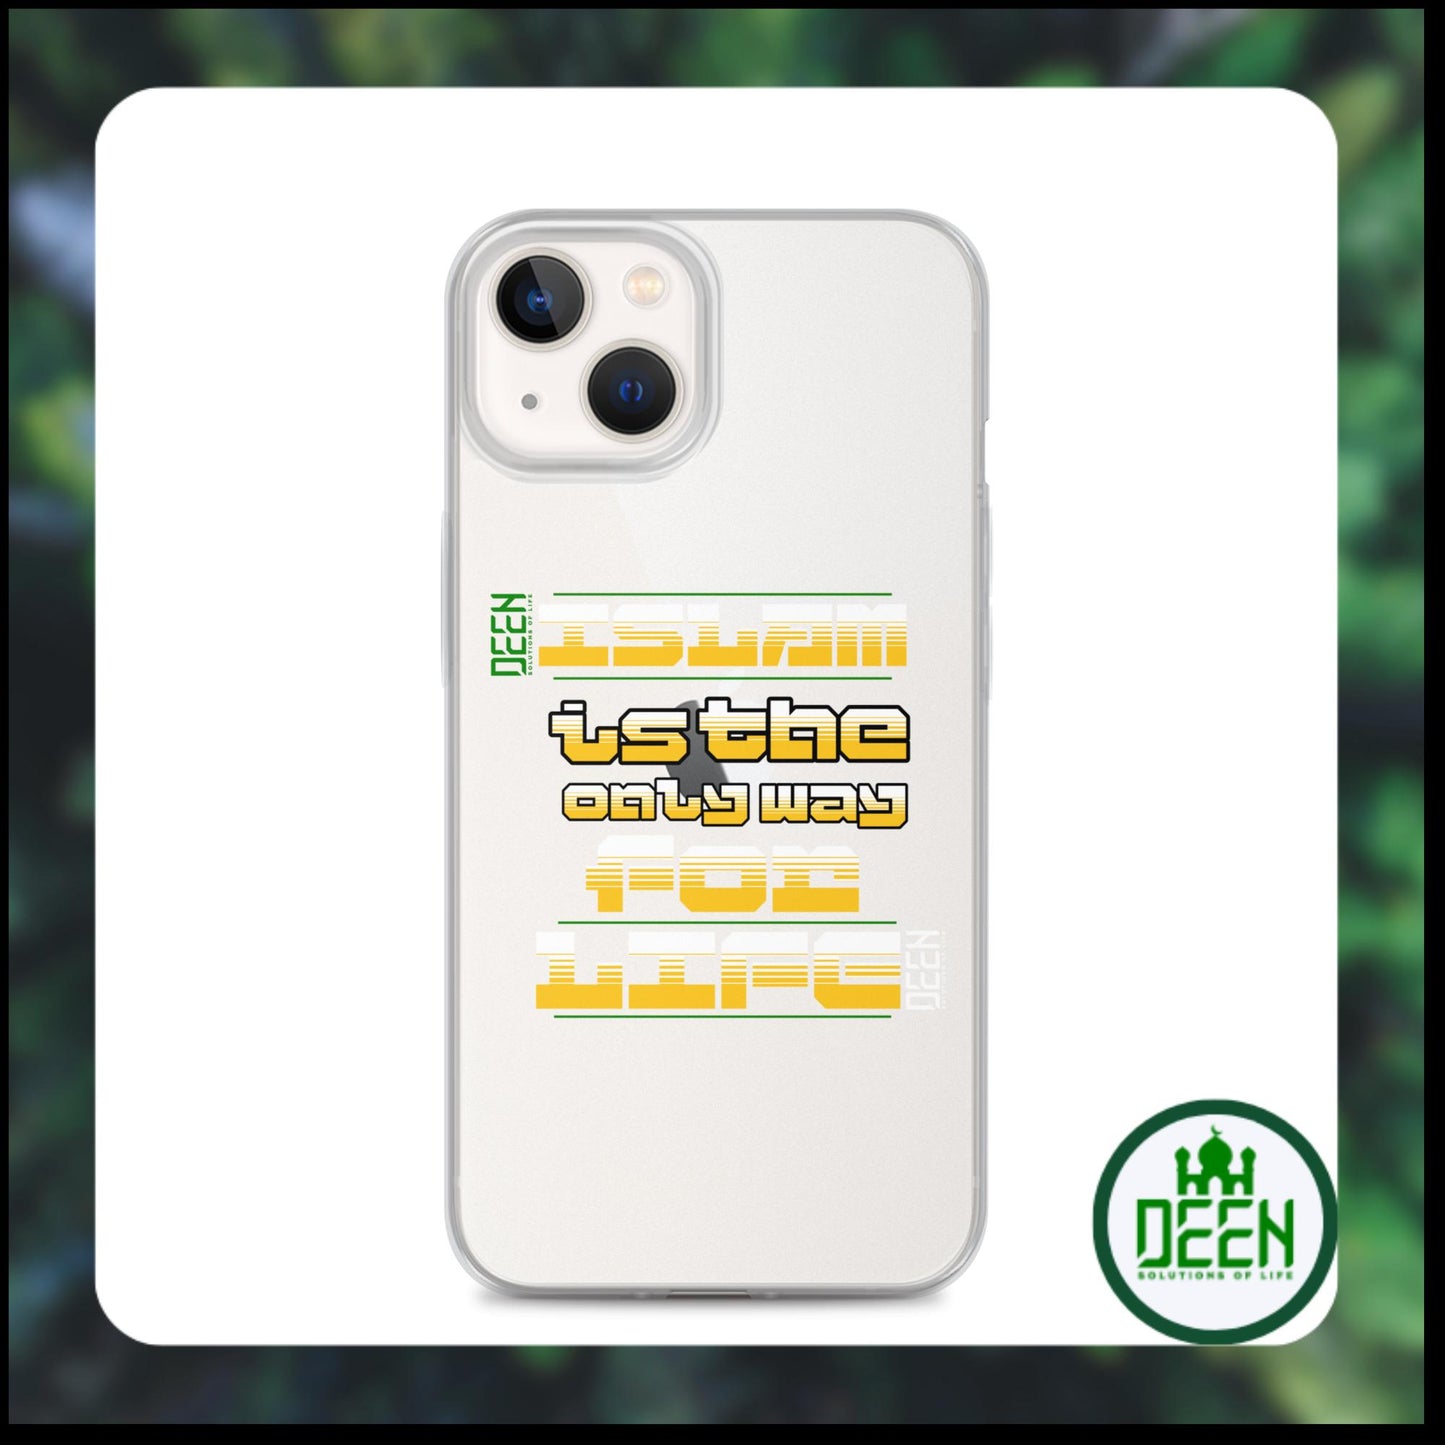 DEEN "Islam is the only way for life" Clear Case for iPhone®